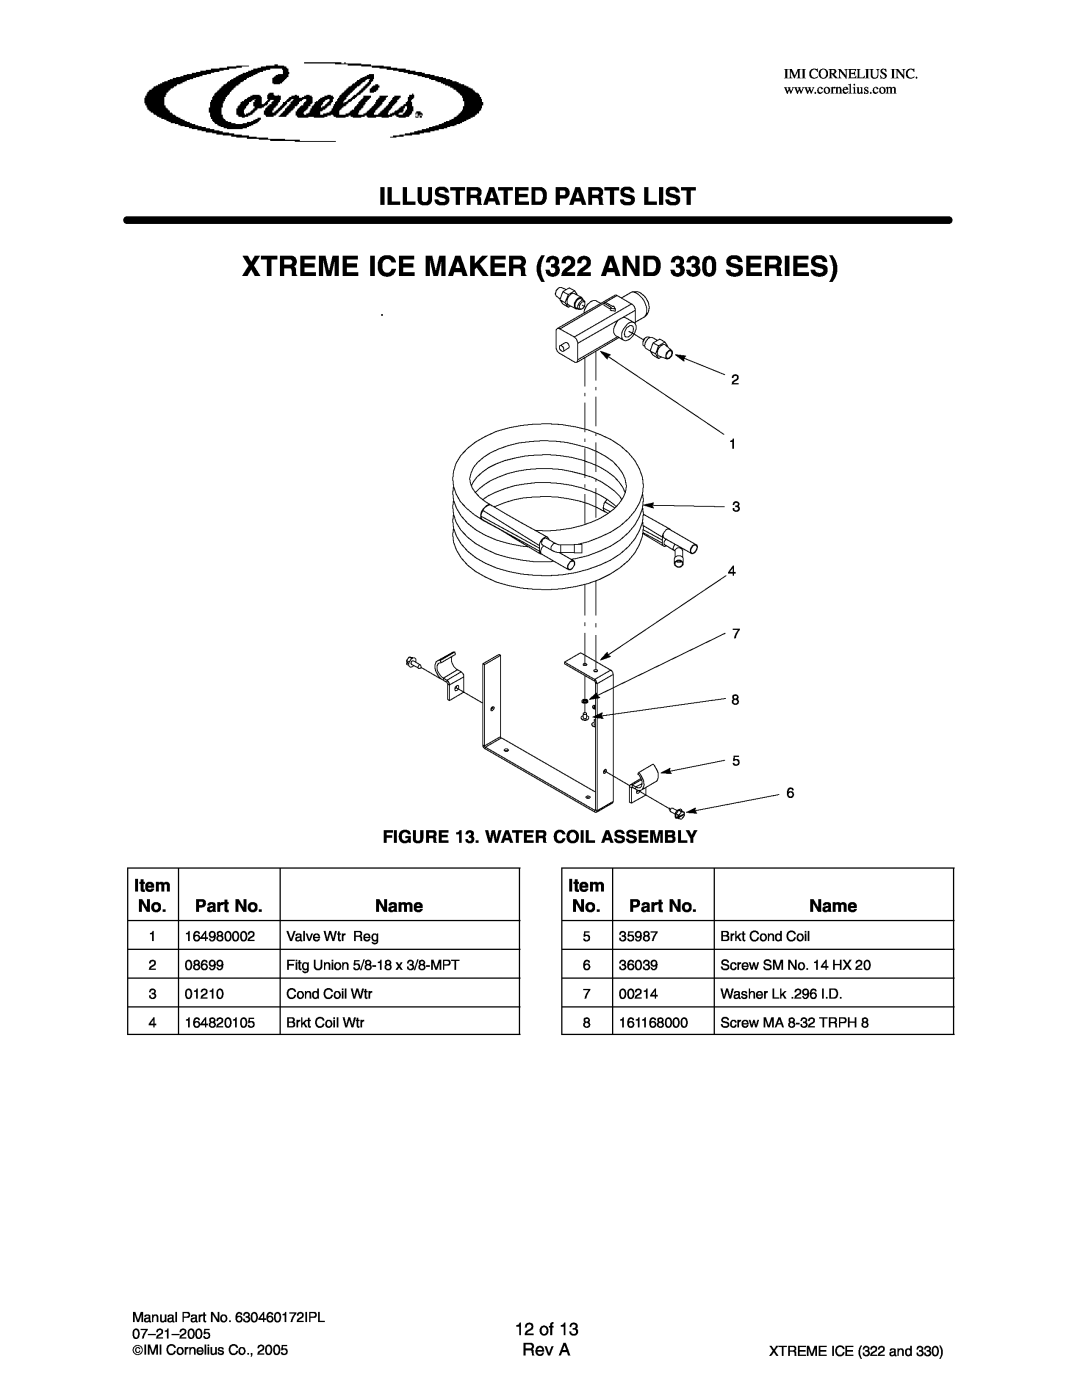 Cornelius 631803002 12 of, XTREME ICE MAKER 322 AND 330 SERIES, Illustrated Parts List, Water Coil Assembly, Name, Rev A 